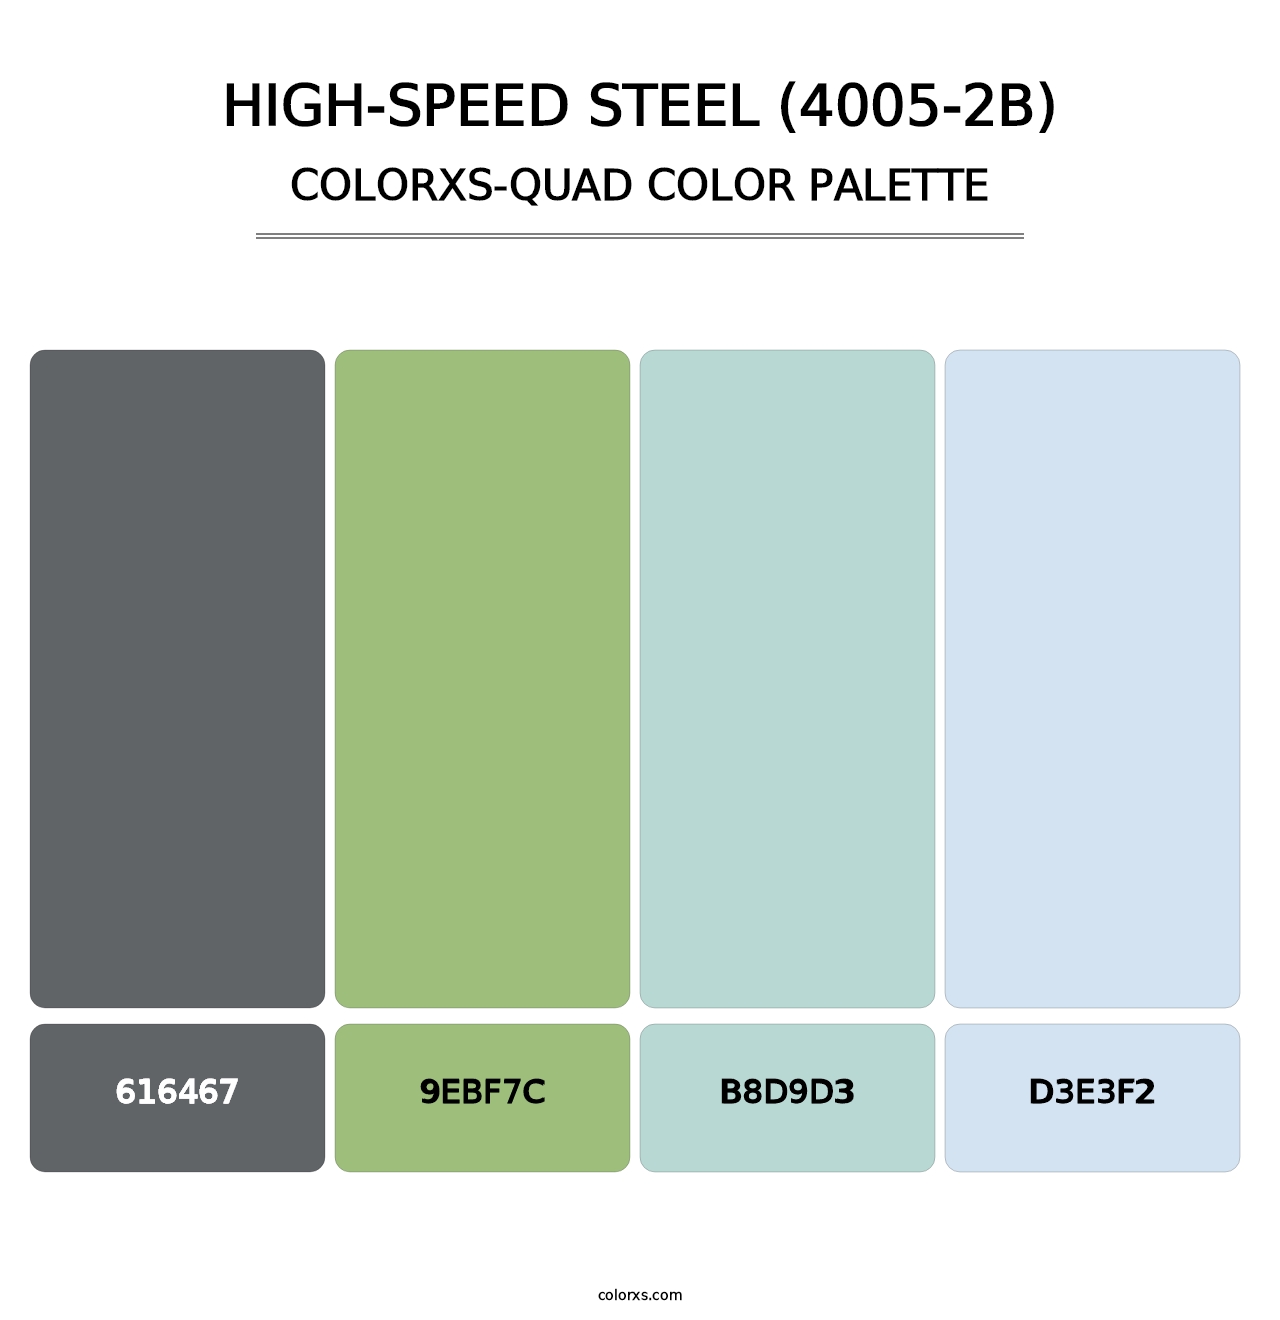 High-Speed Steel (4005-2B) - Colorxs Quad Palette